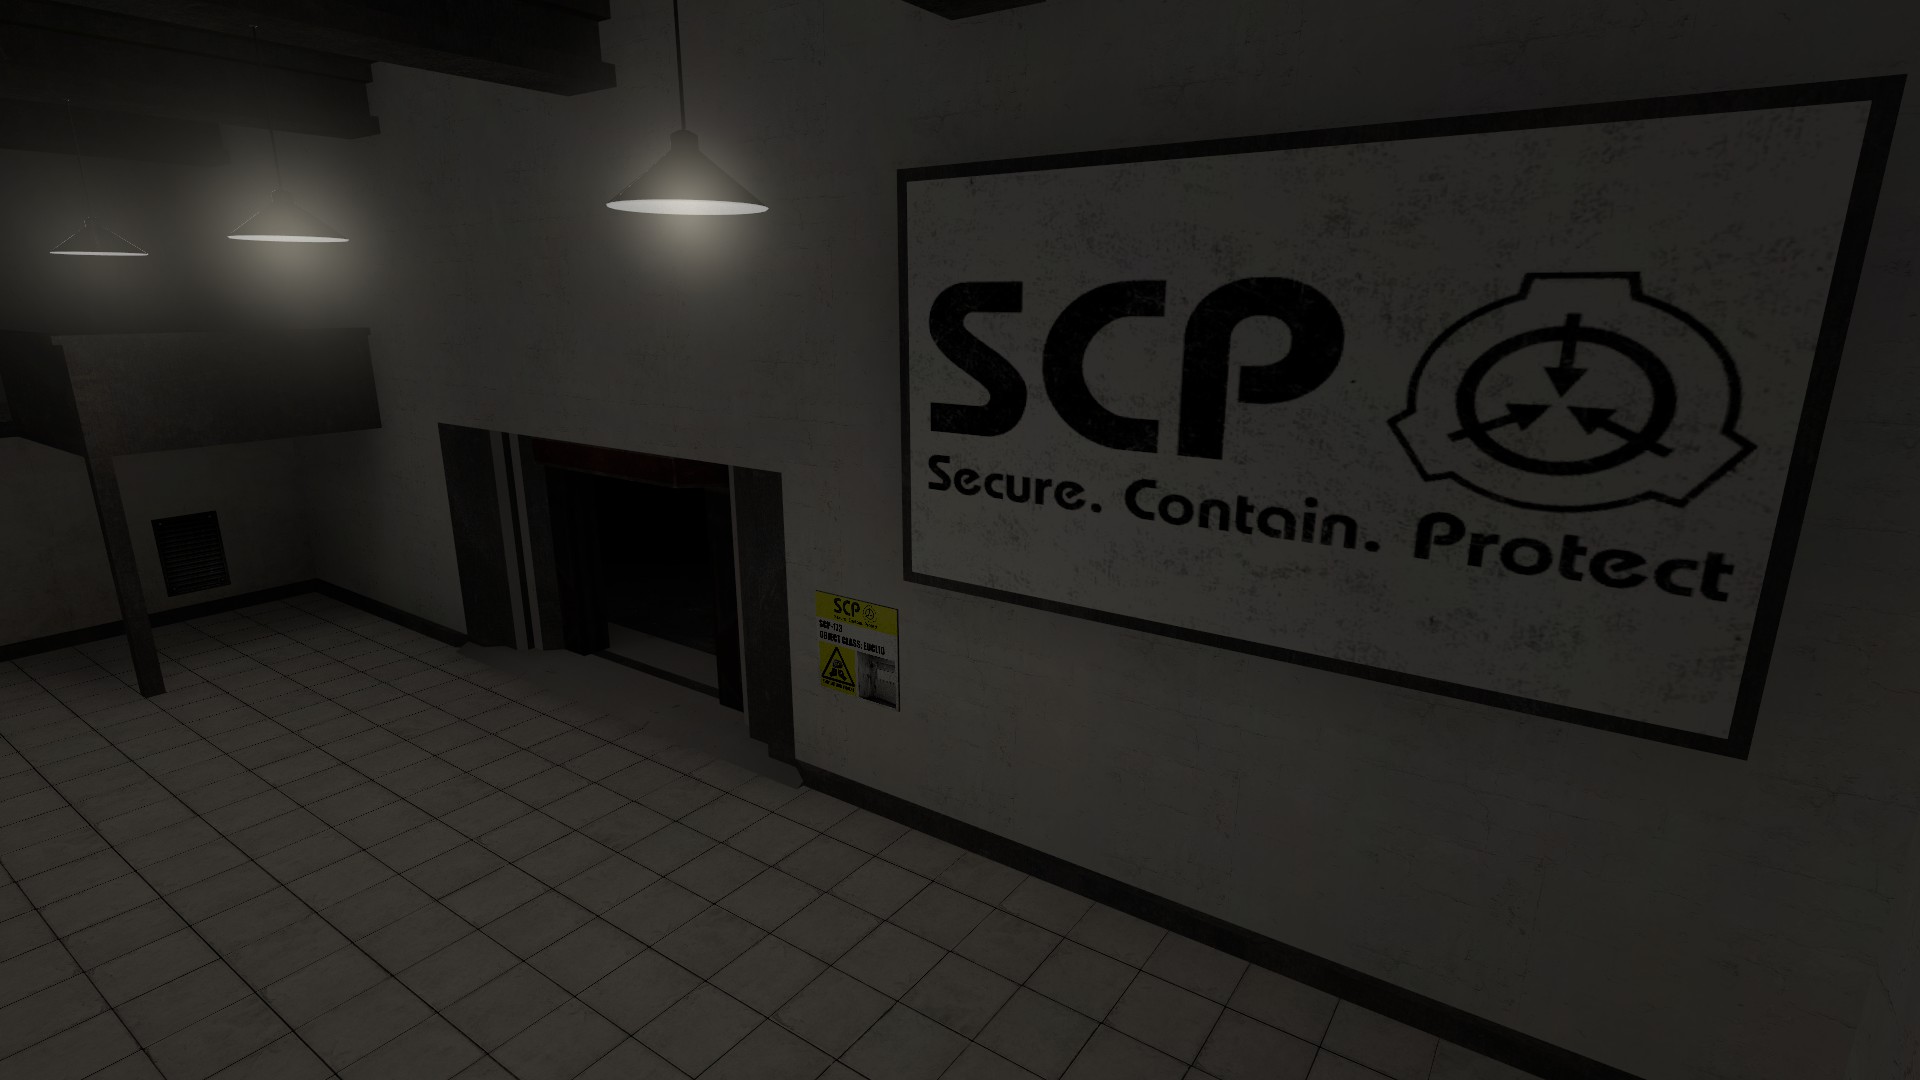 SCP-939, Slender Fortress Non-Official Wikia